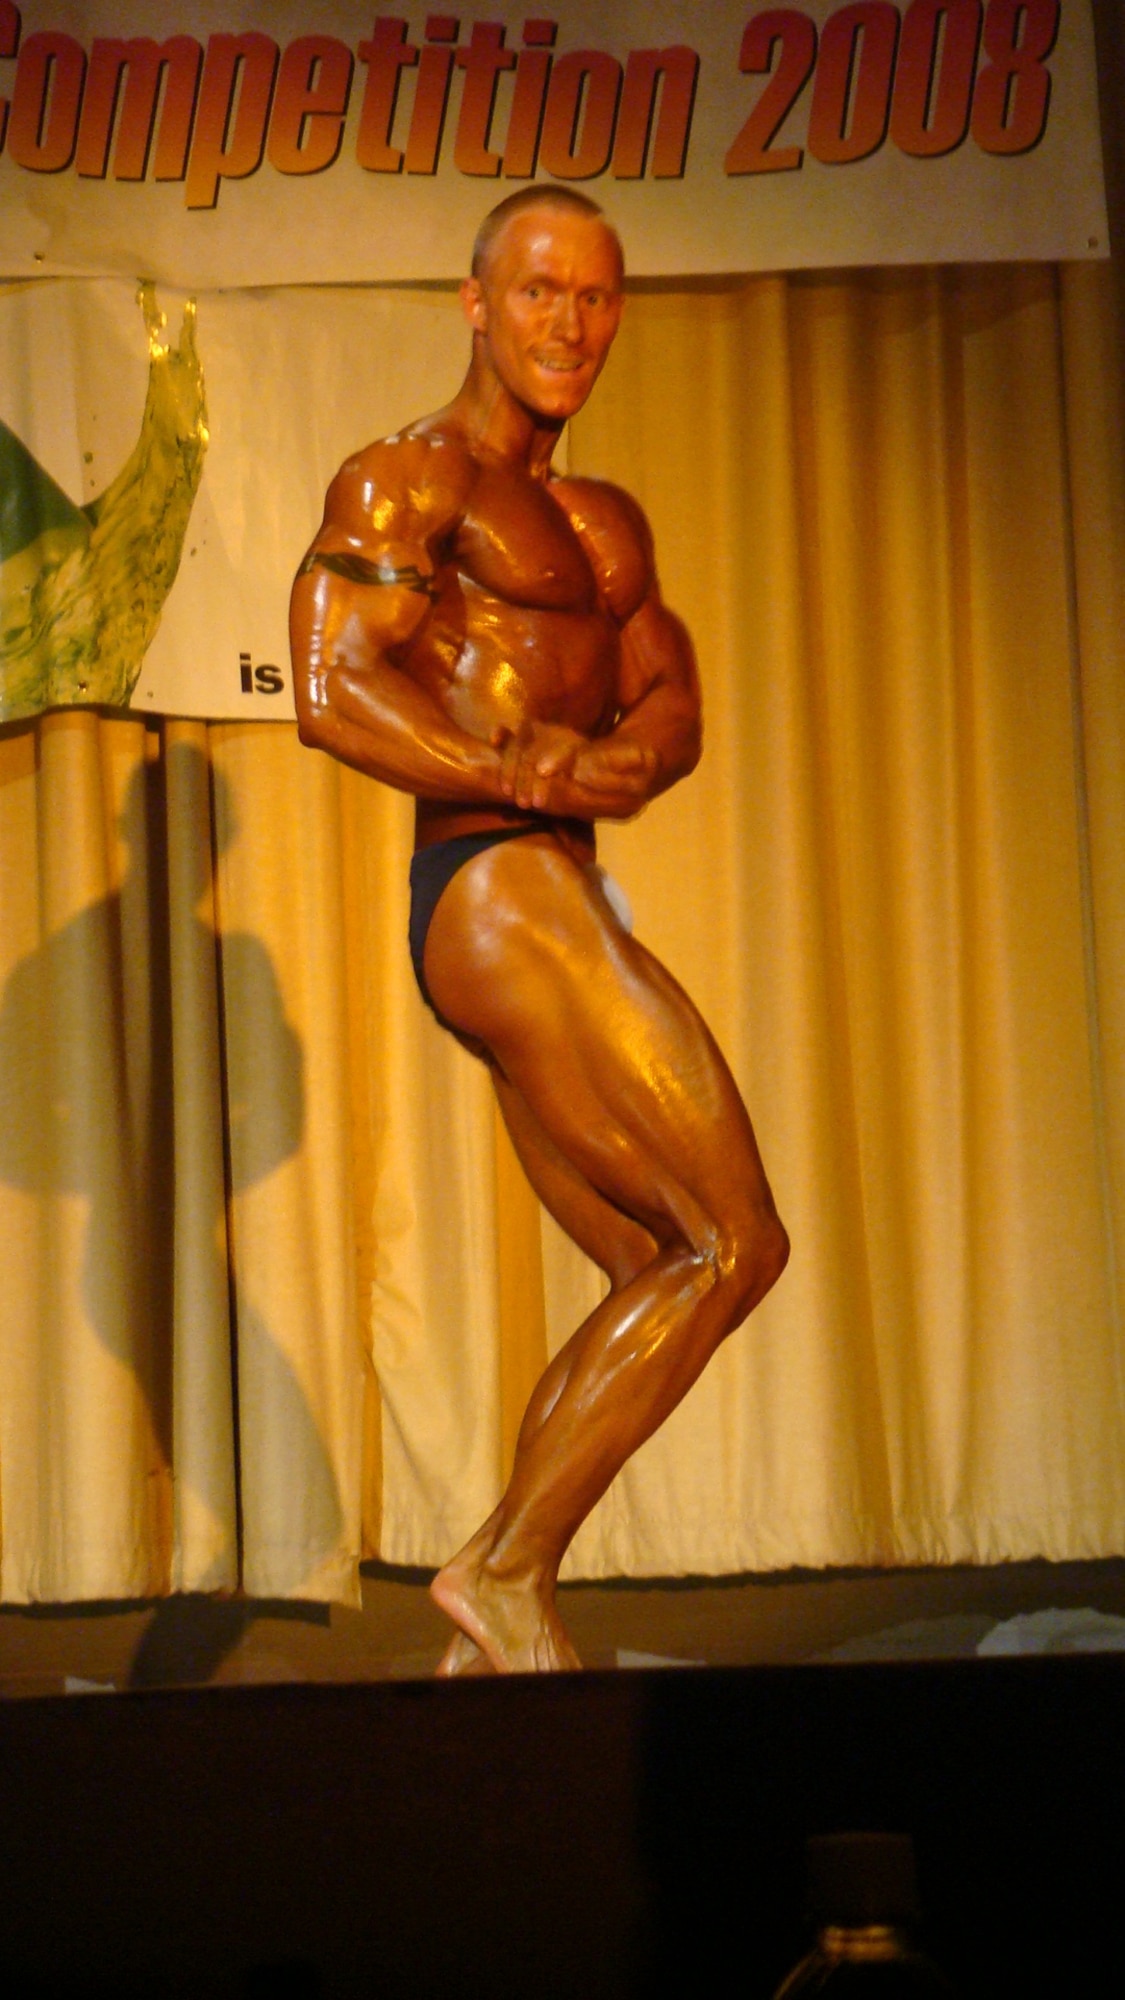 Staff Sgt. Jason D. Williams, 382nd Training Squadron training manager, wins first place in the 154 pounds and under weight class at the 2008 Annual Luke Air Force Base Bodybuilding Competition in Ariz. Aug. 16.  He also placed second in the overall competition. (U.S. Air Force photo)